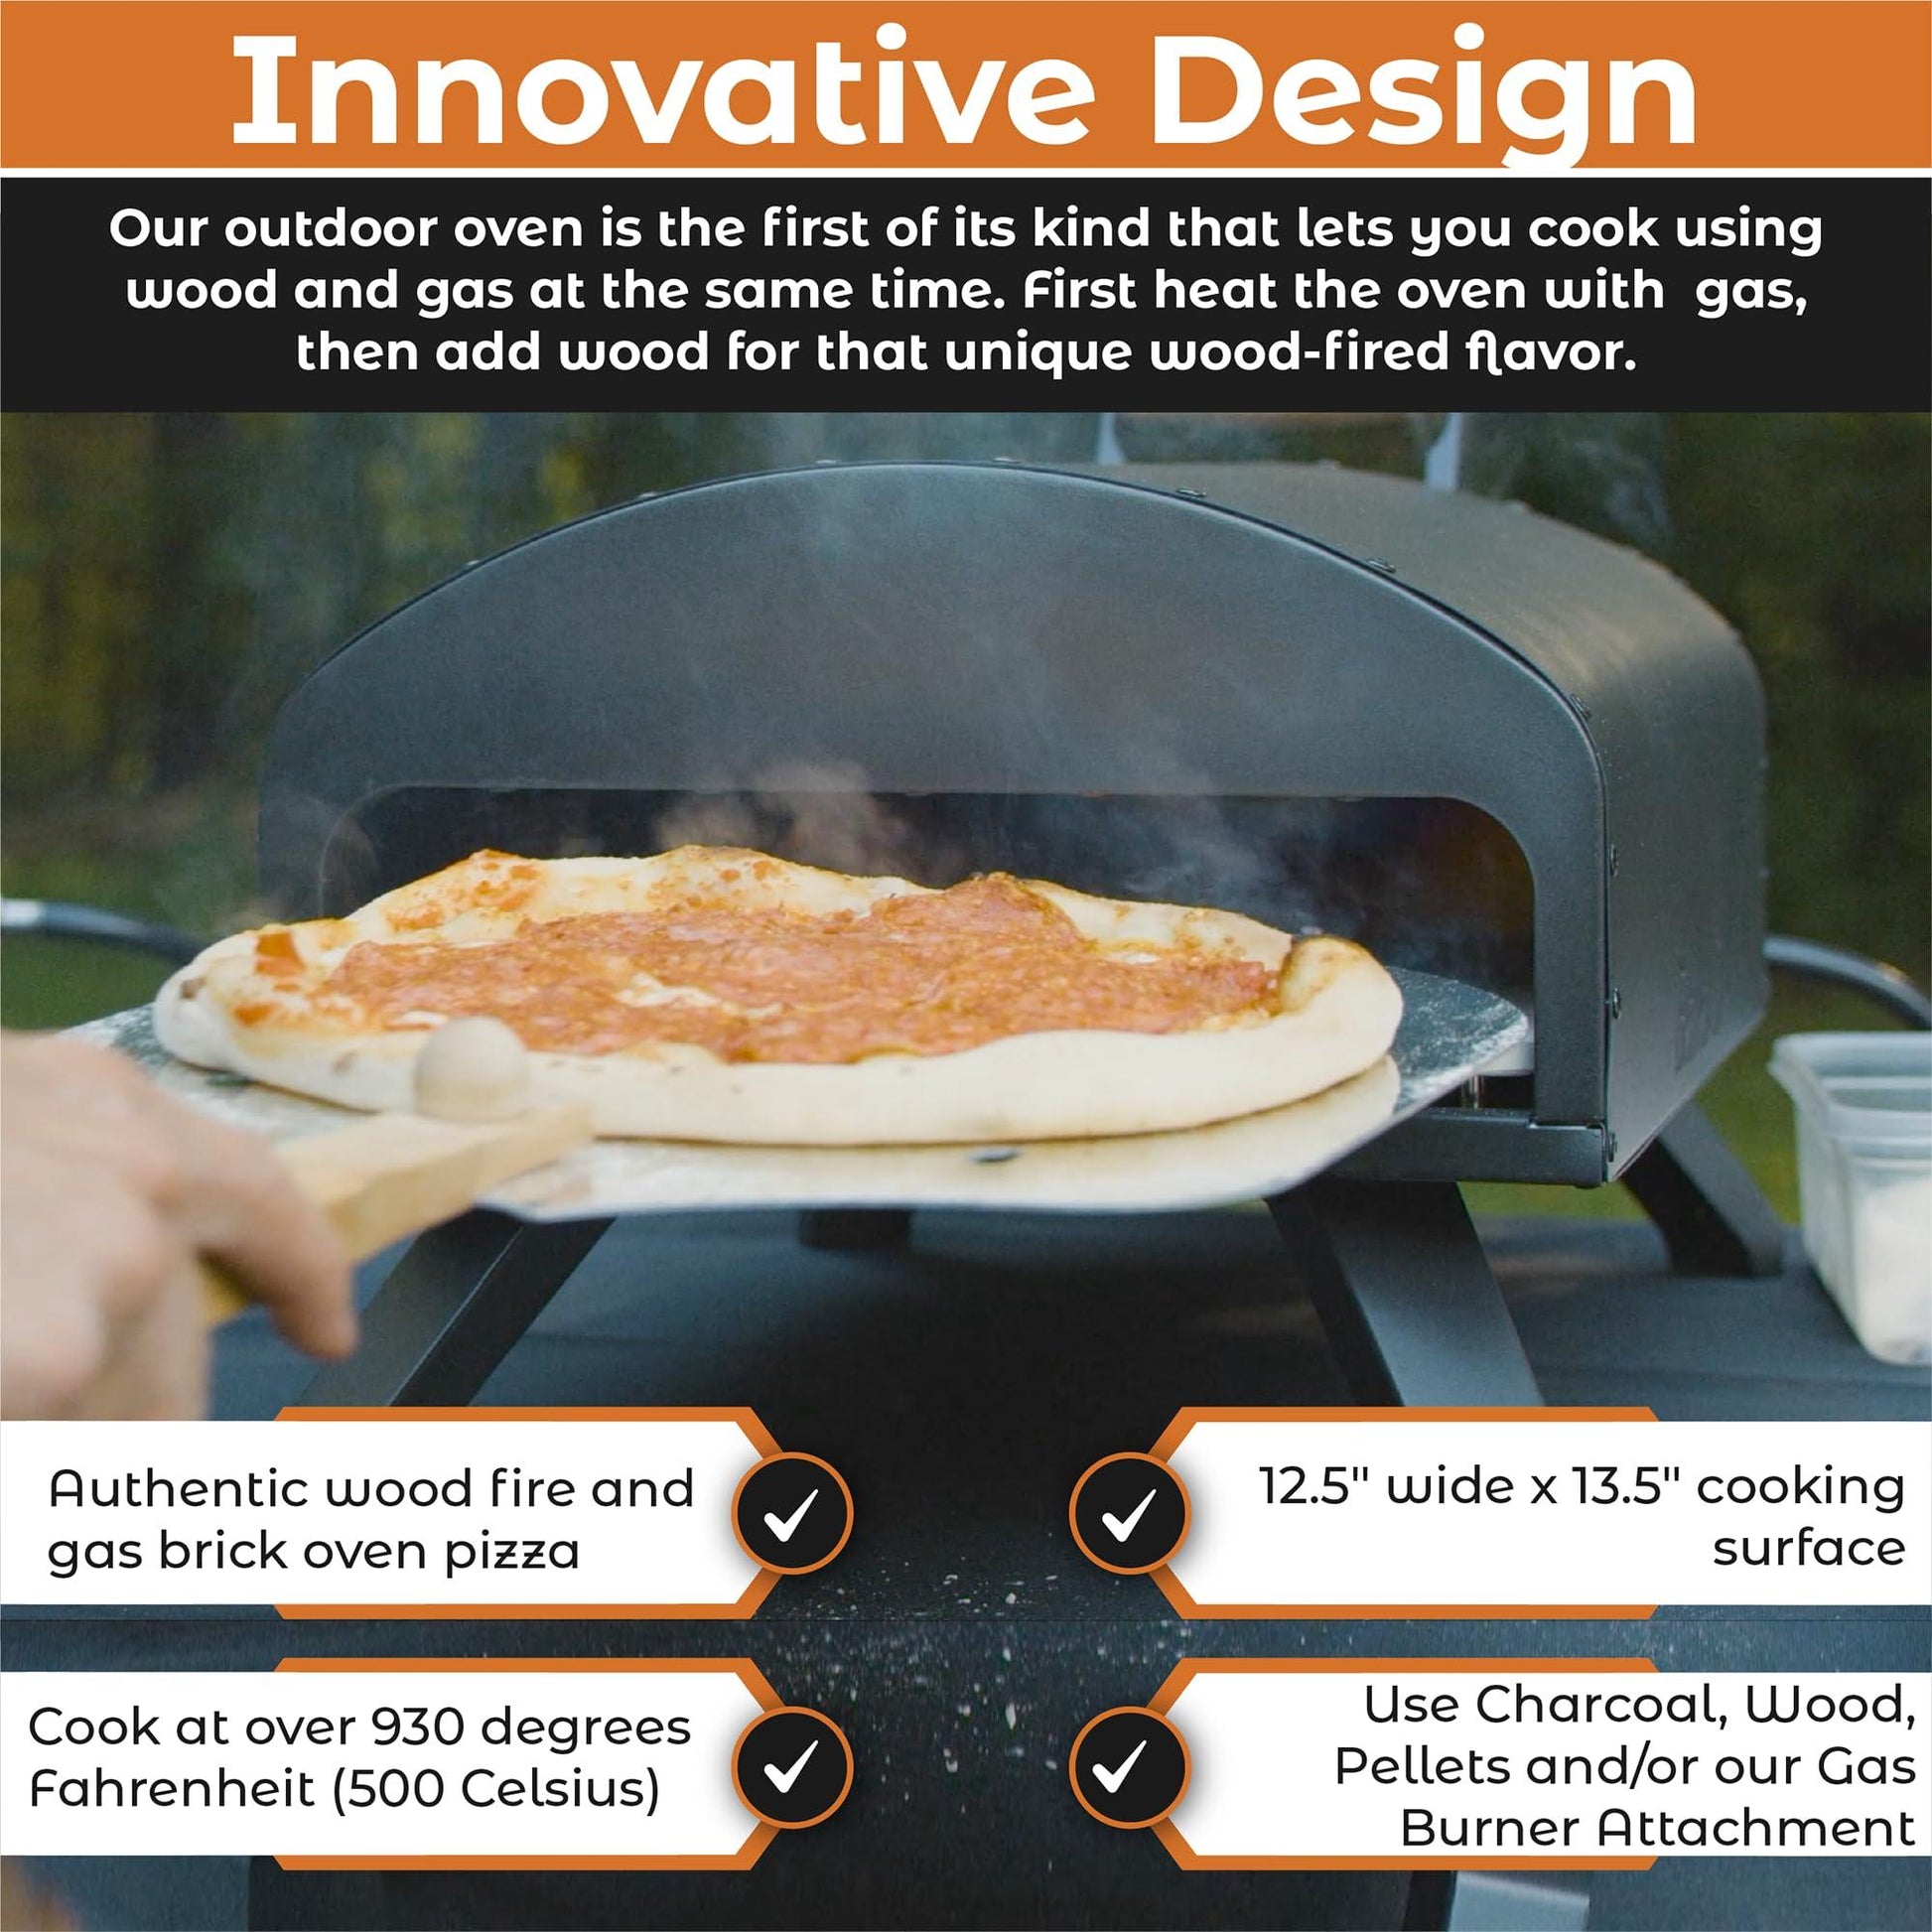 Bertello Outdoor Pizza Oven Bundle-Gas & Wood Simultaneously-Portable Brick Oven Portable Pizza Maker With Gas Burner, Peel, Wood Tray, Cover & Thermometer - As Featured on SHARK TANK - Easy to Use - CookCave